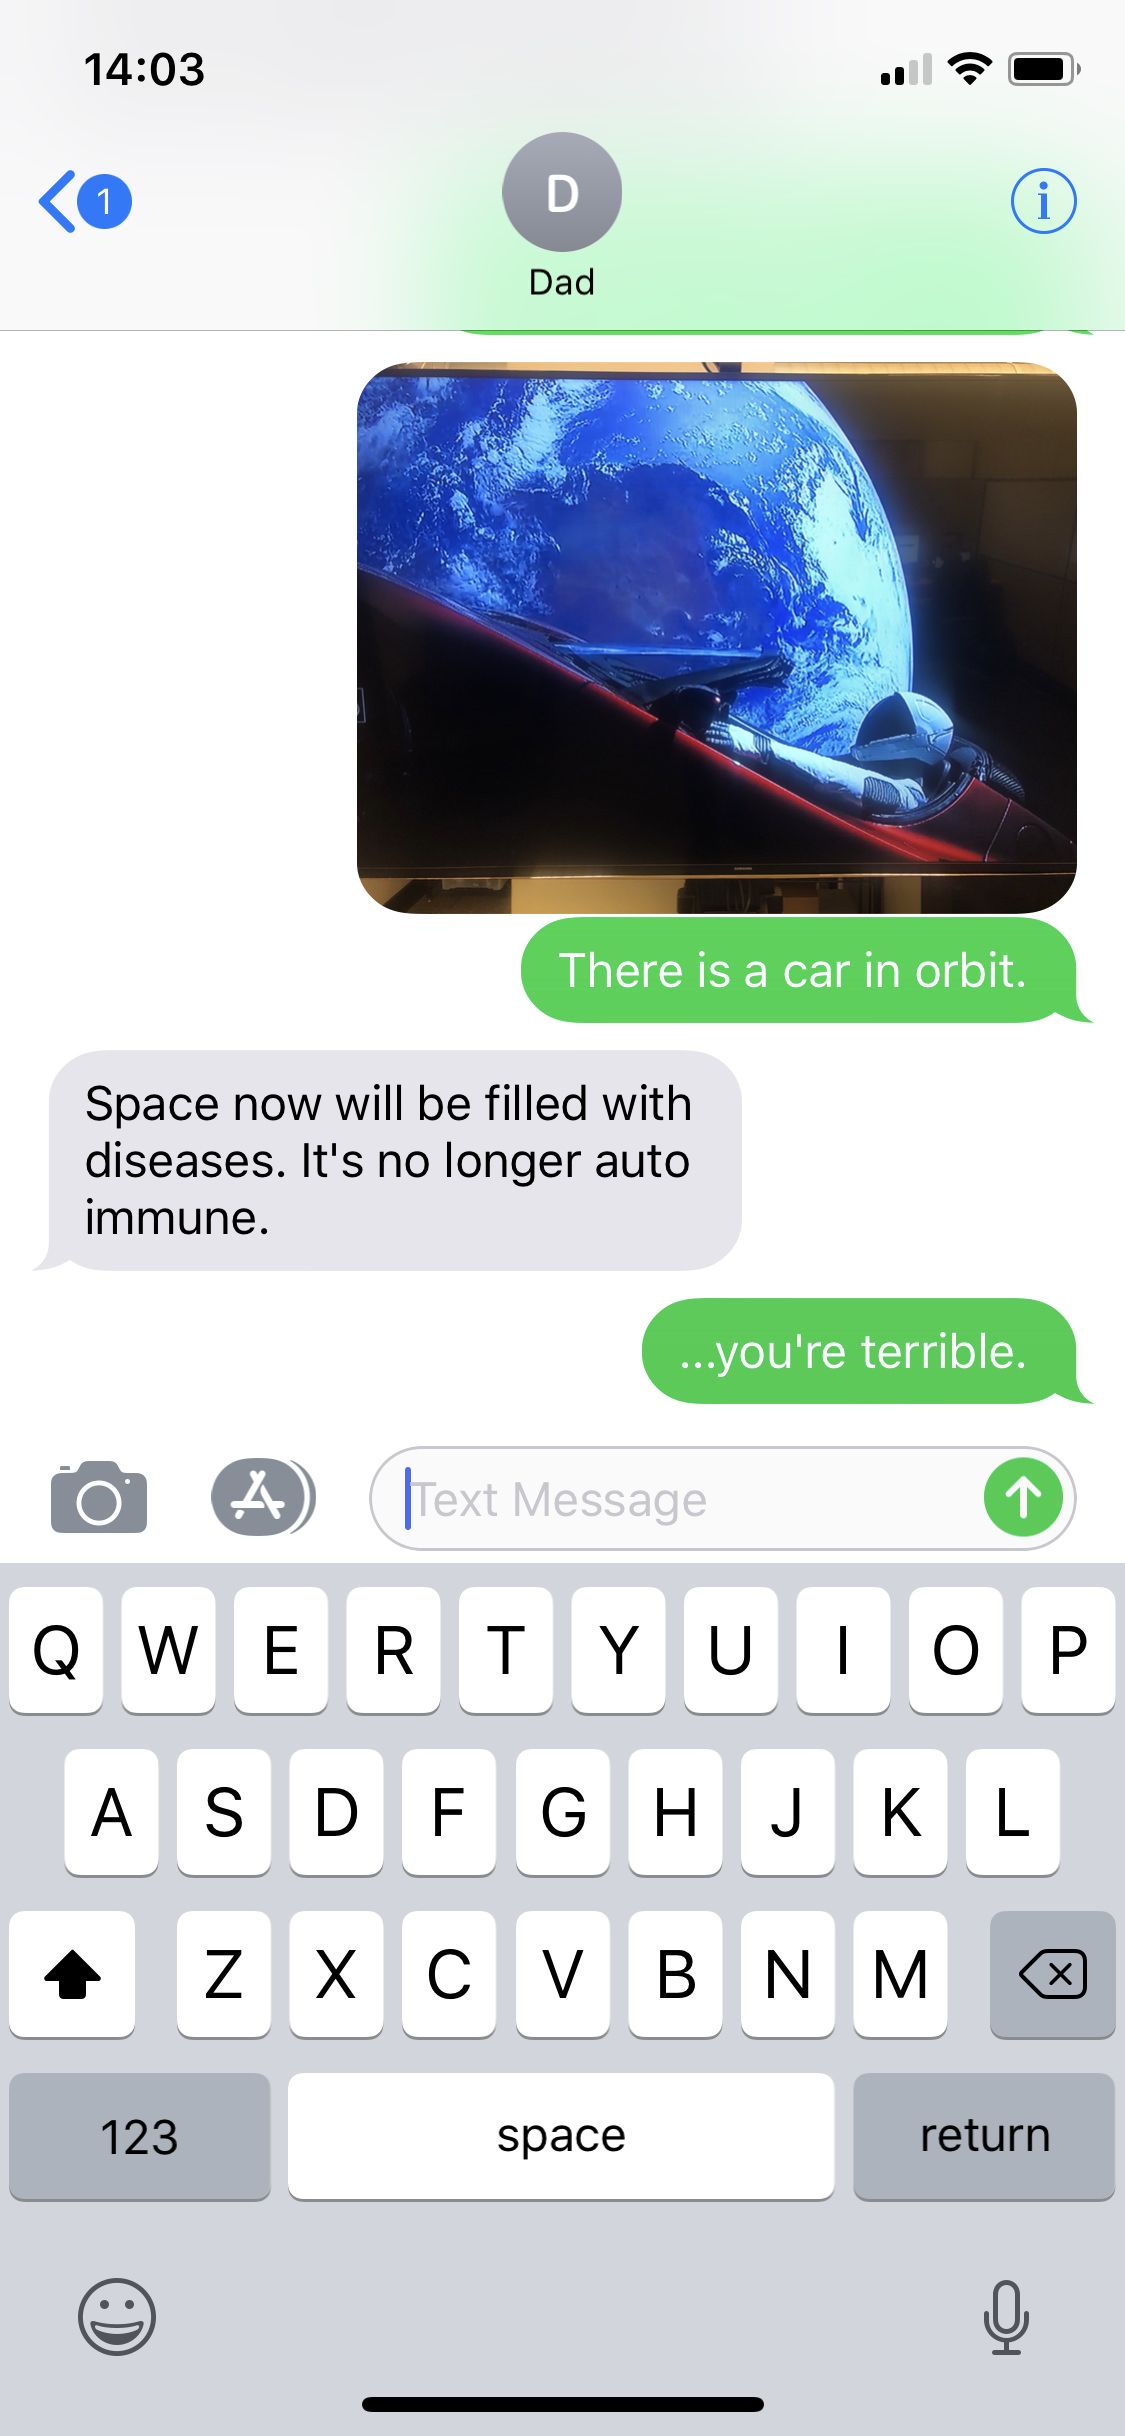 My father is the king of space related dad humor.